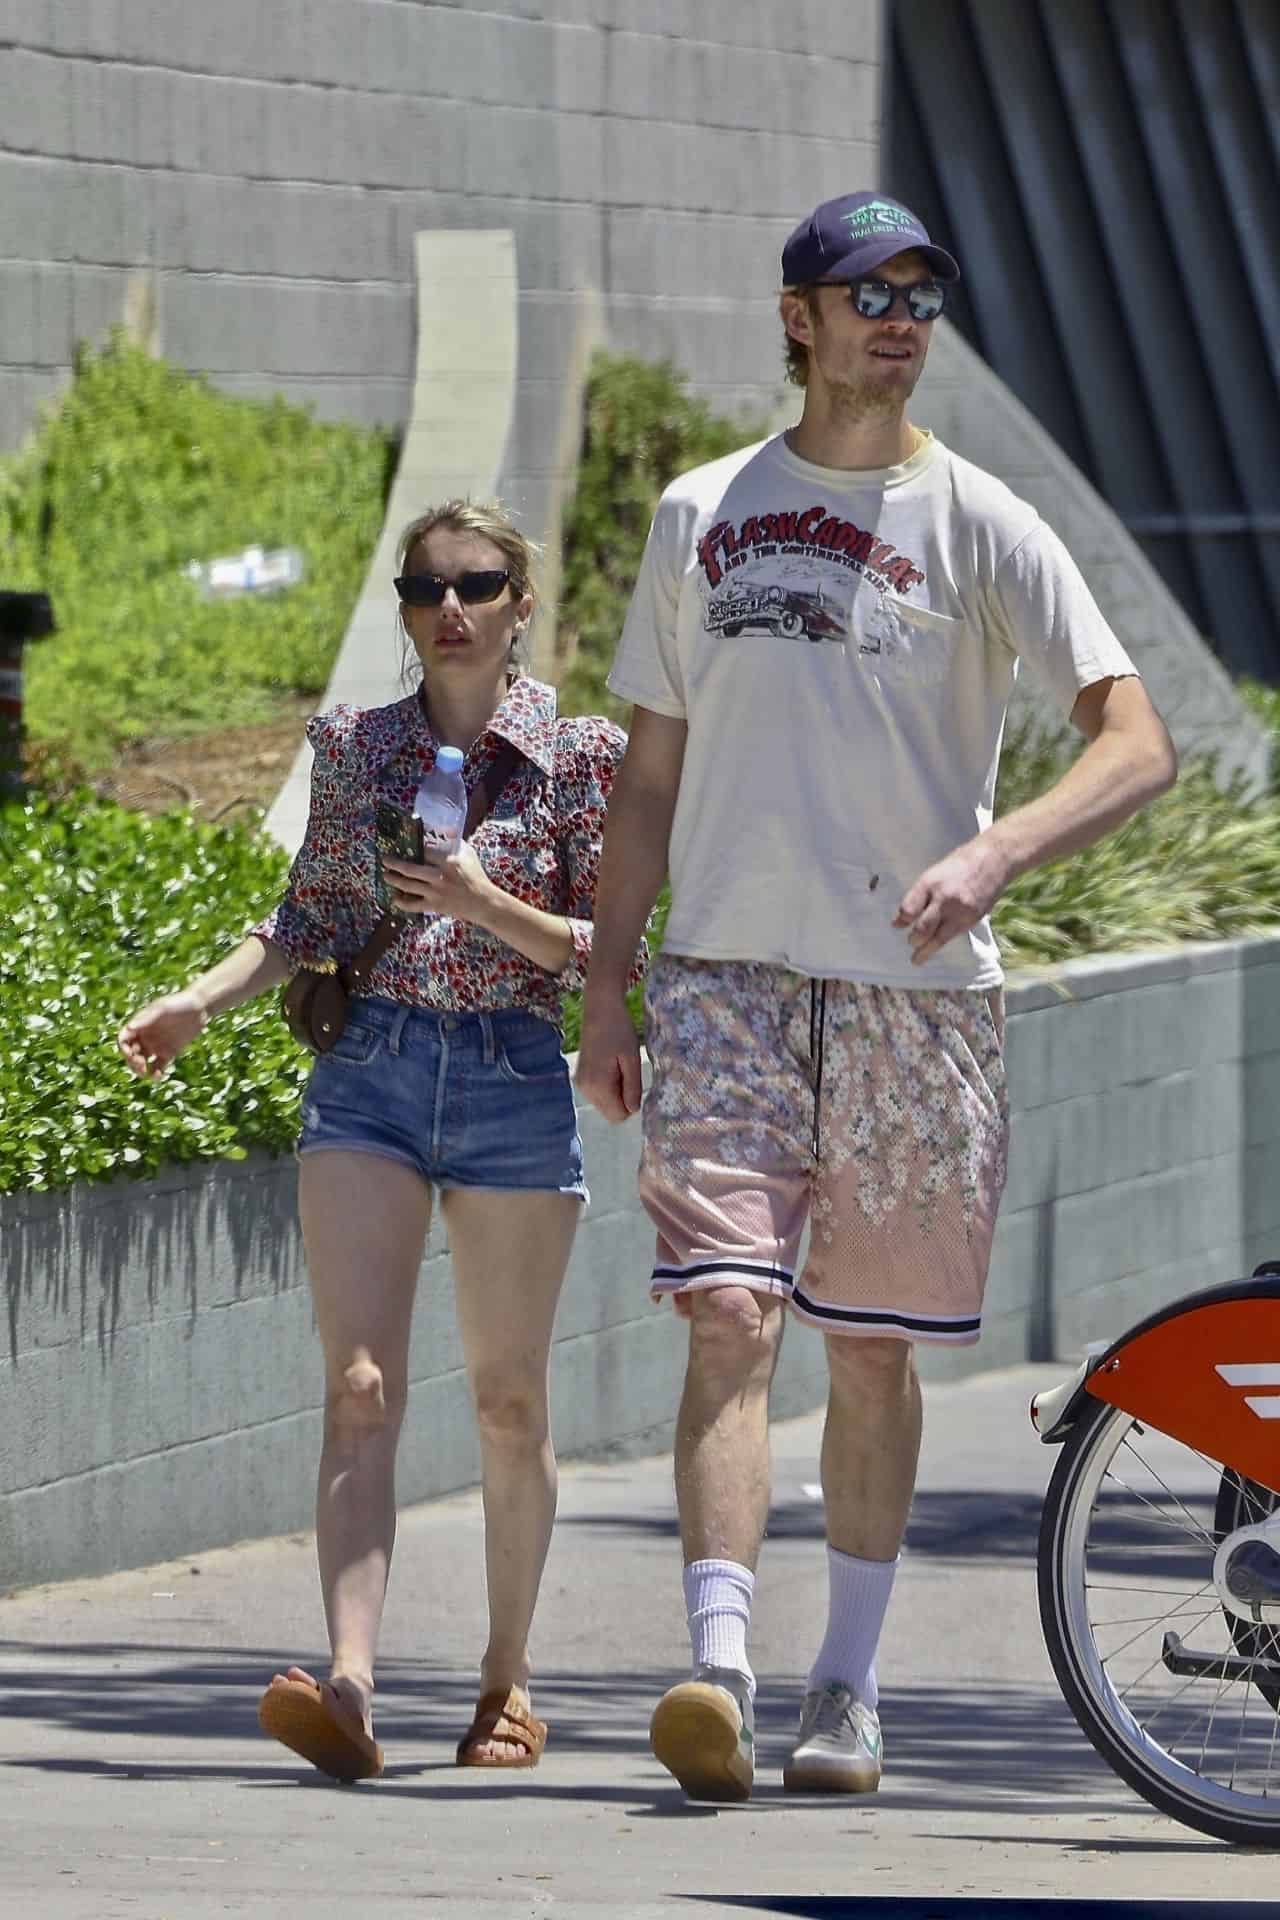 Emma Roberts Shows Off Her Legs in Daisy Dukes While Out with Cody John